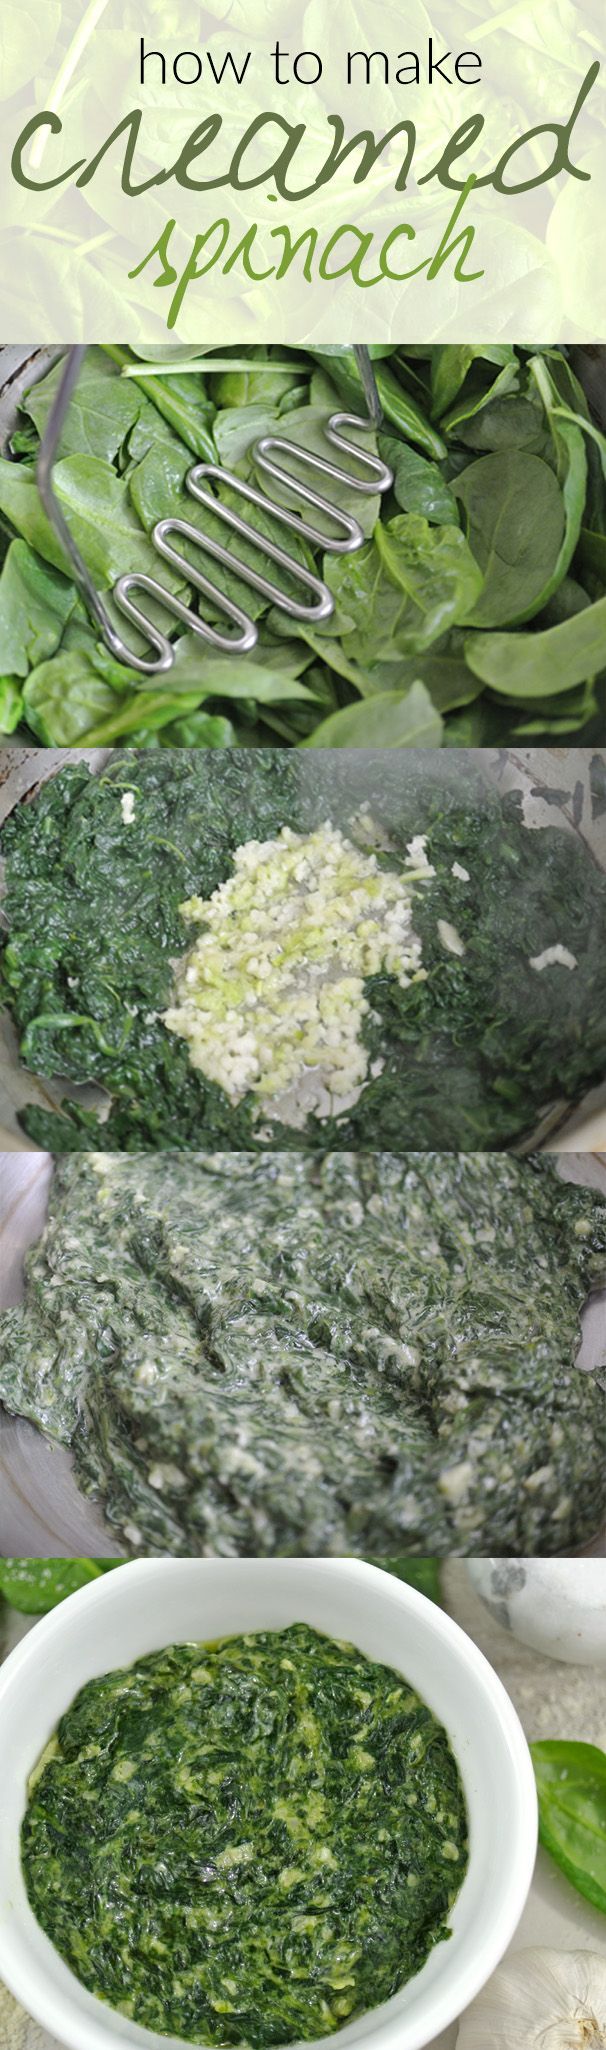 Looking for a low carb side dish? Look no further because this creamed spinach recipe is a healthy and easy choice! @